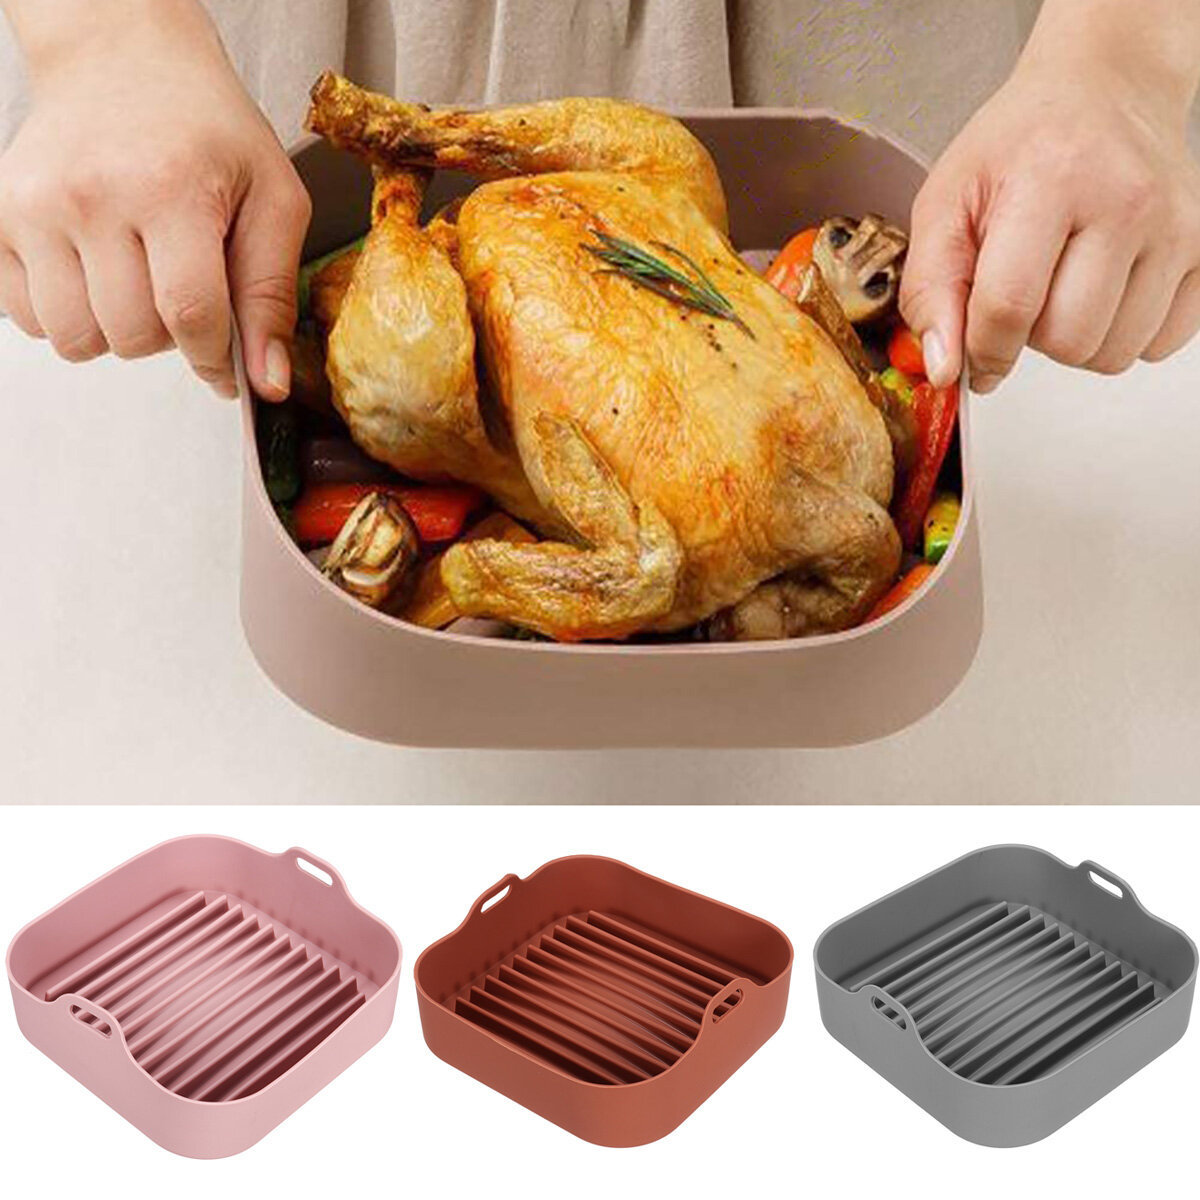 

Multifunctional Silicone Baking Tray High Temperature Resistant Non-stick Bread Fried Baking Pan with Handles